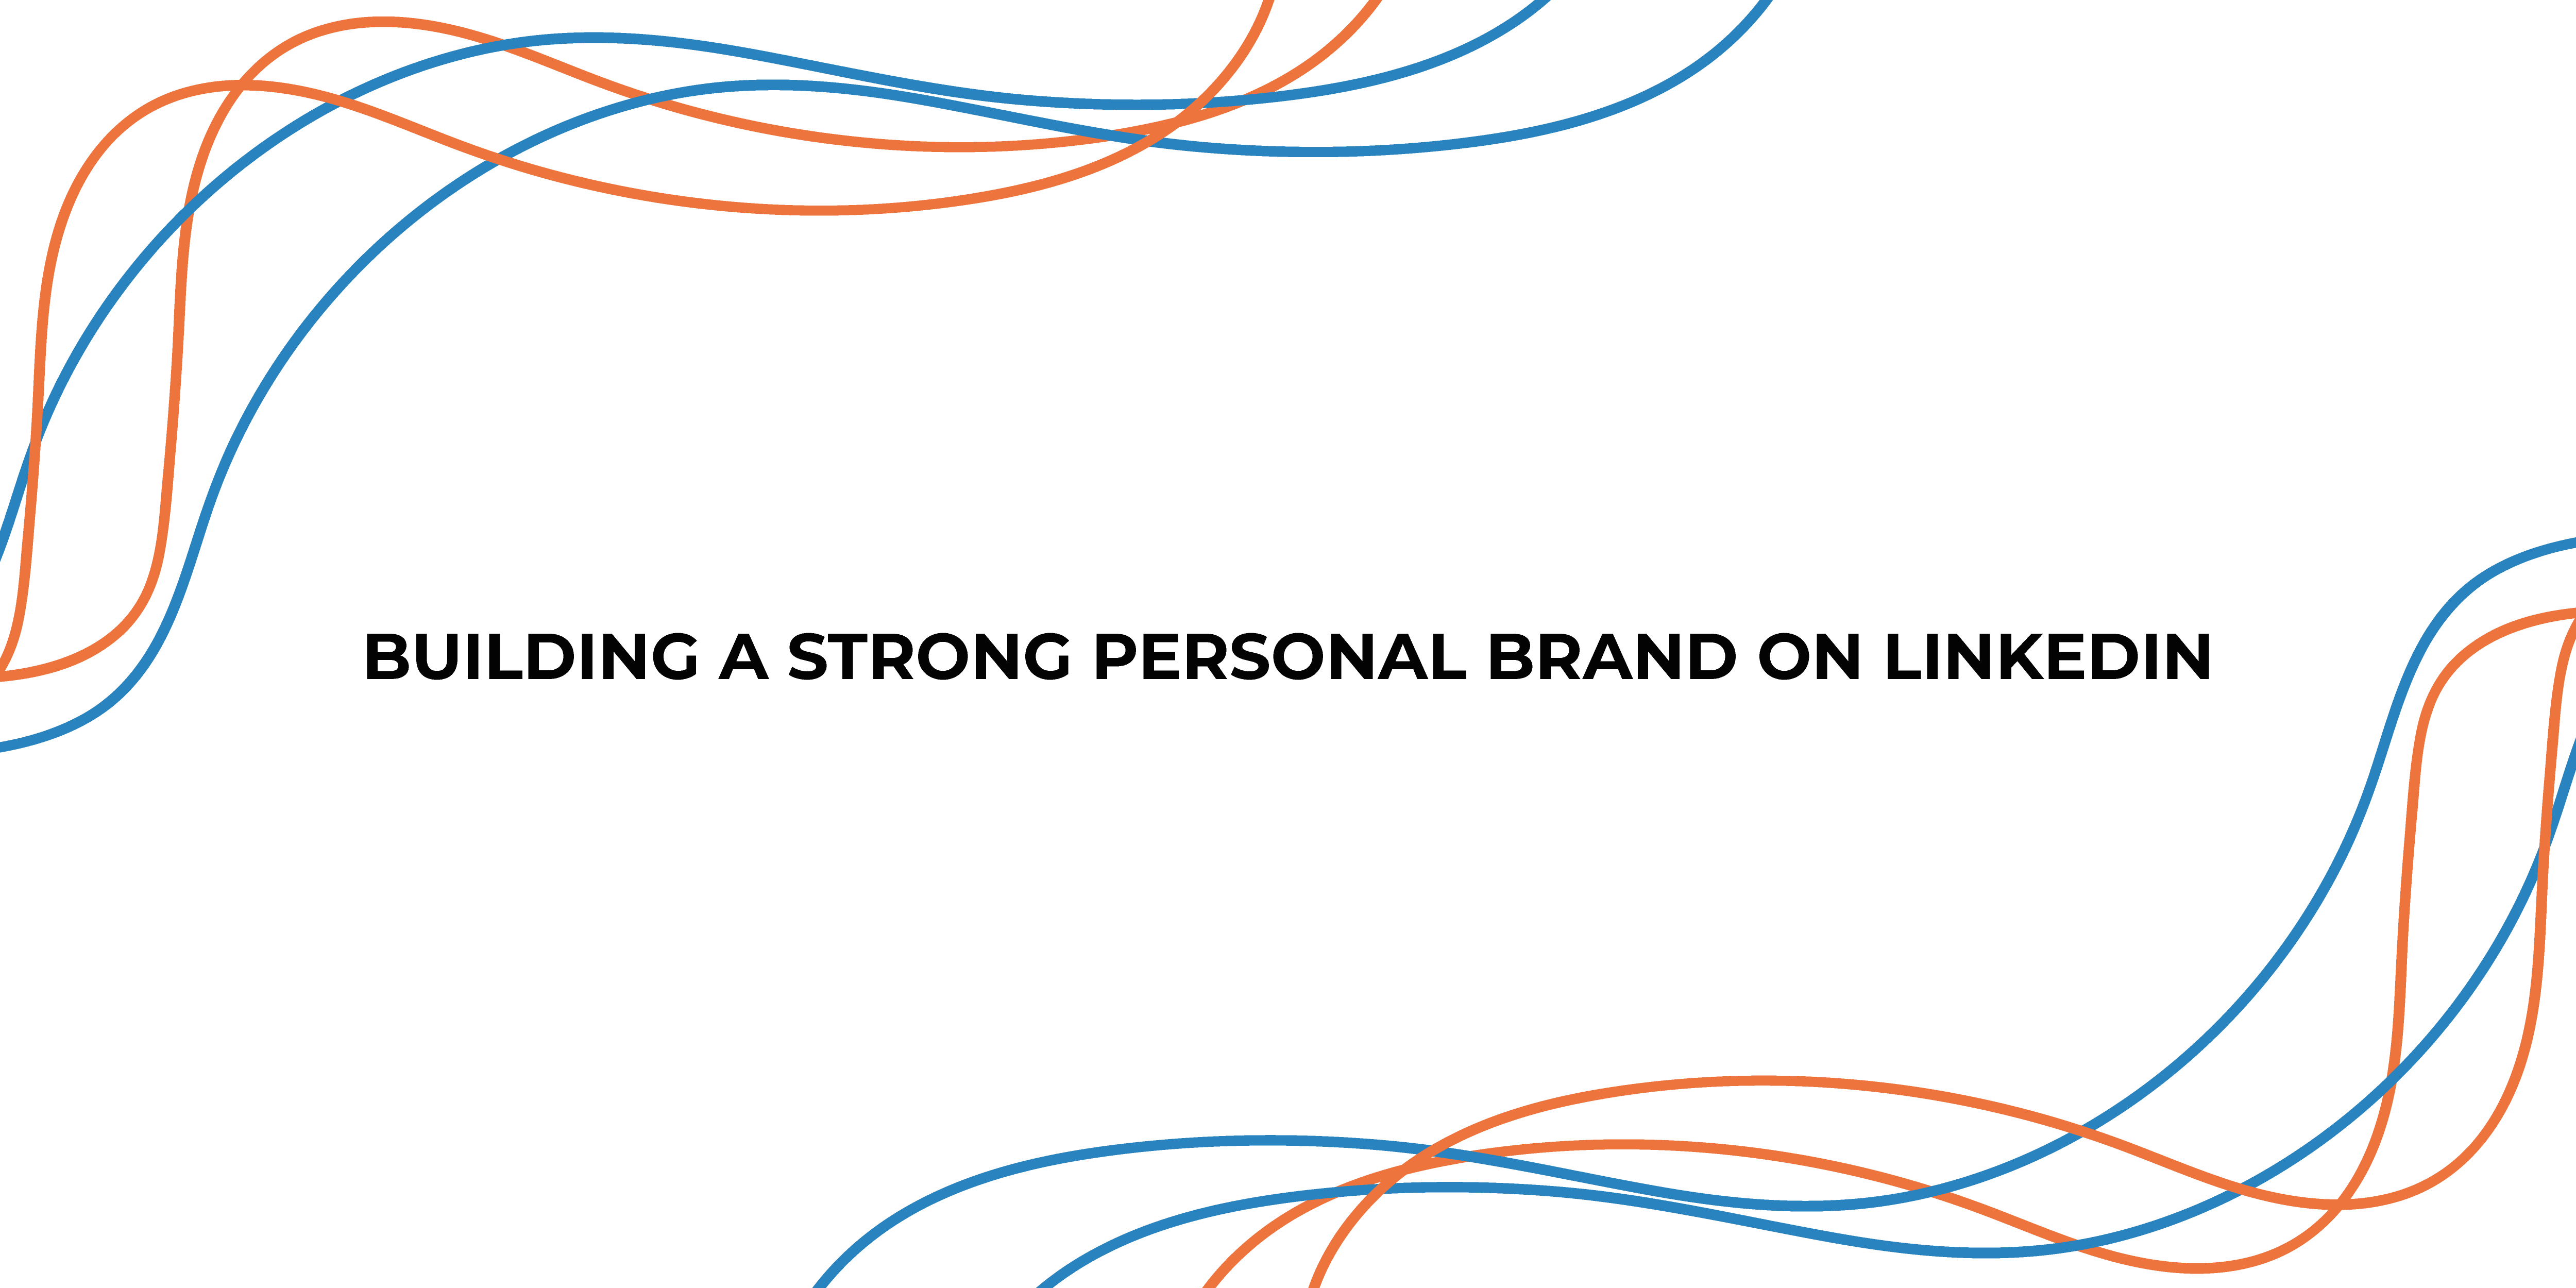 Building A Strong Personal Brand on LinkedIn